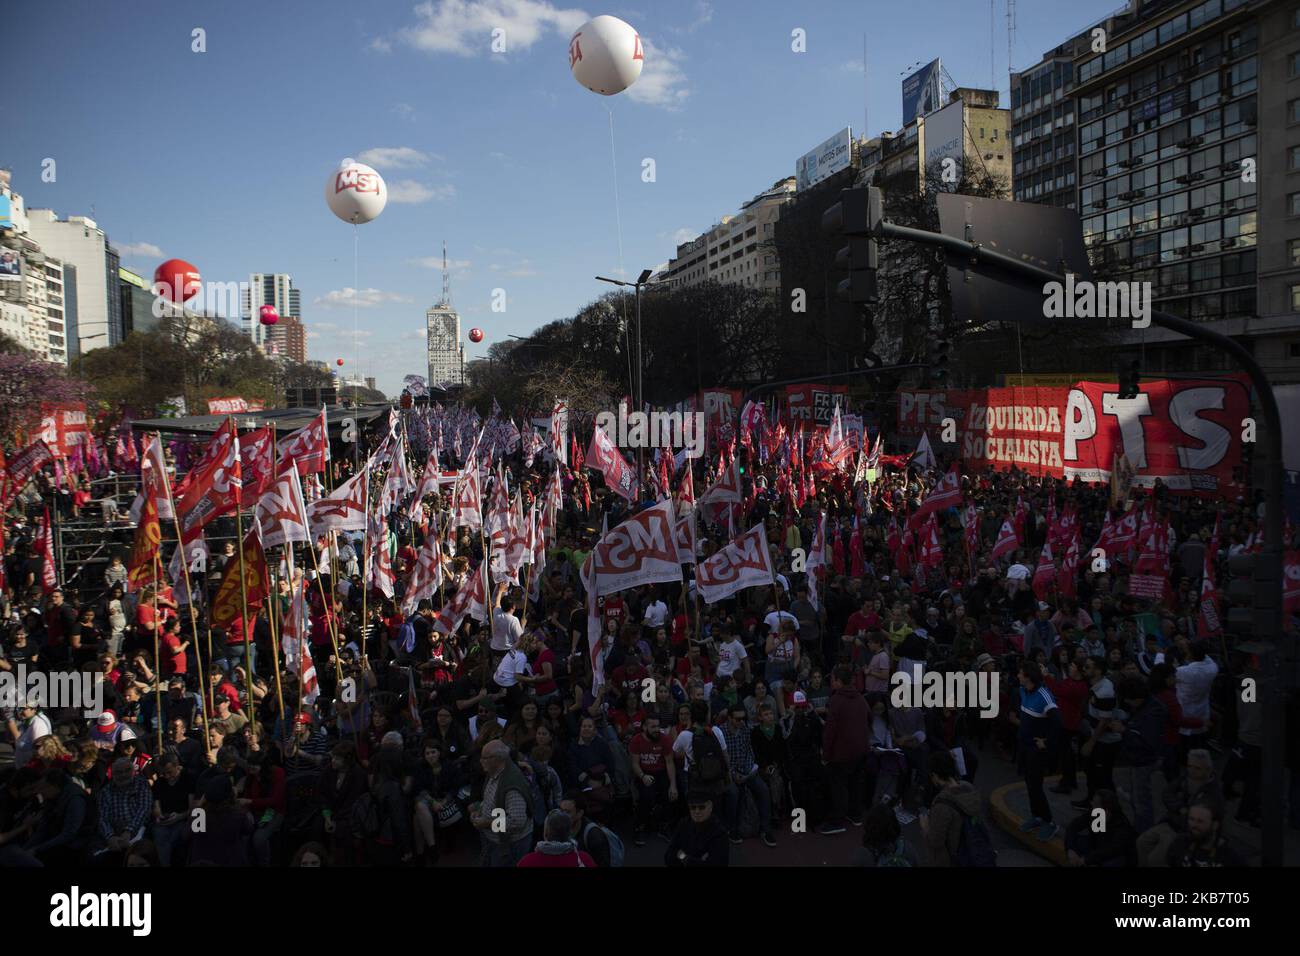 Campaign act towards the presidential elections of the Frente de Izquierda Unidad, one of the political forces competing in the 2019 Argentine presidential elections, on October 5, 2019 in Buenos Aires, Argentina. (Photo by Matias Baglietto/NurPhoto) Stock Photo